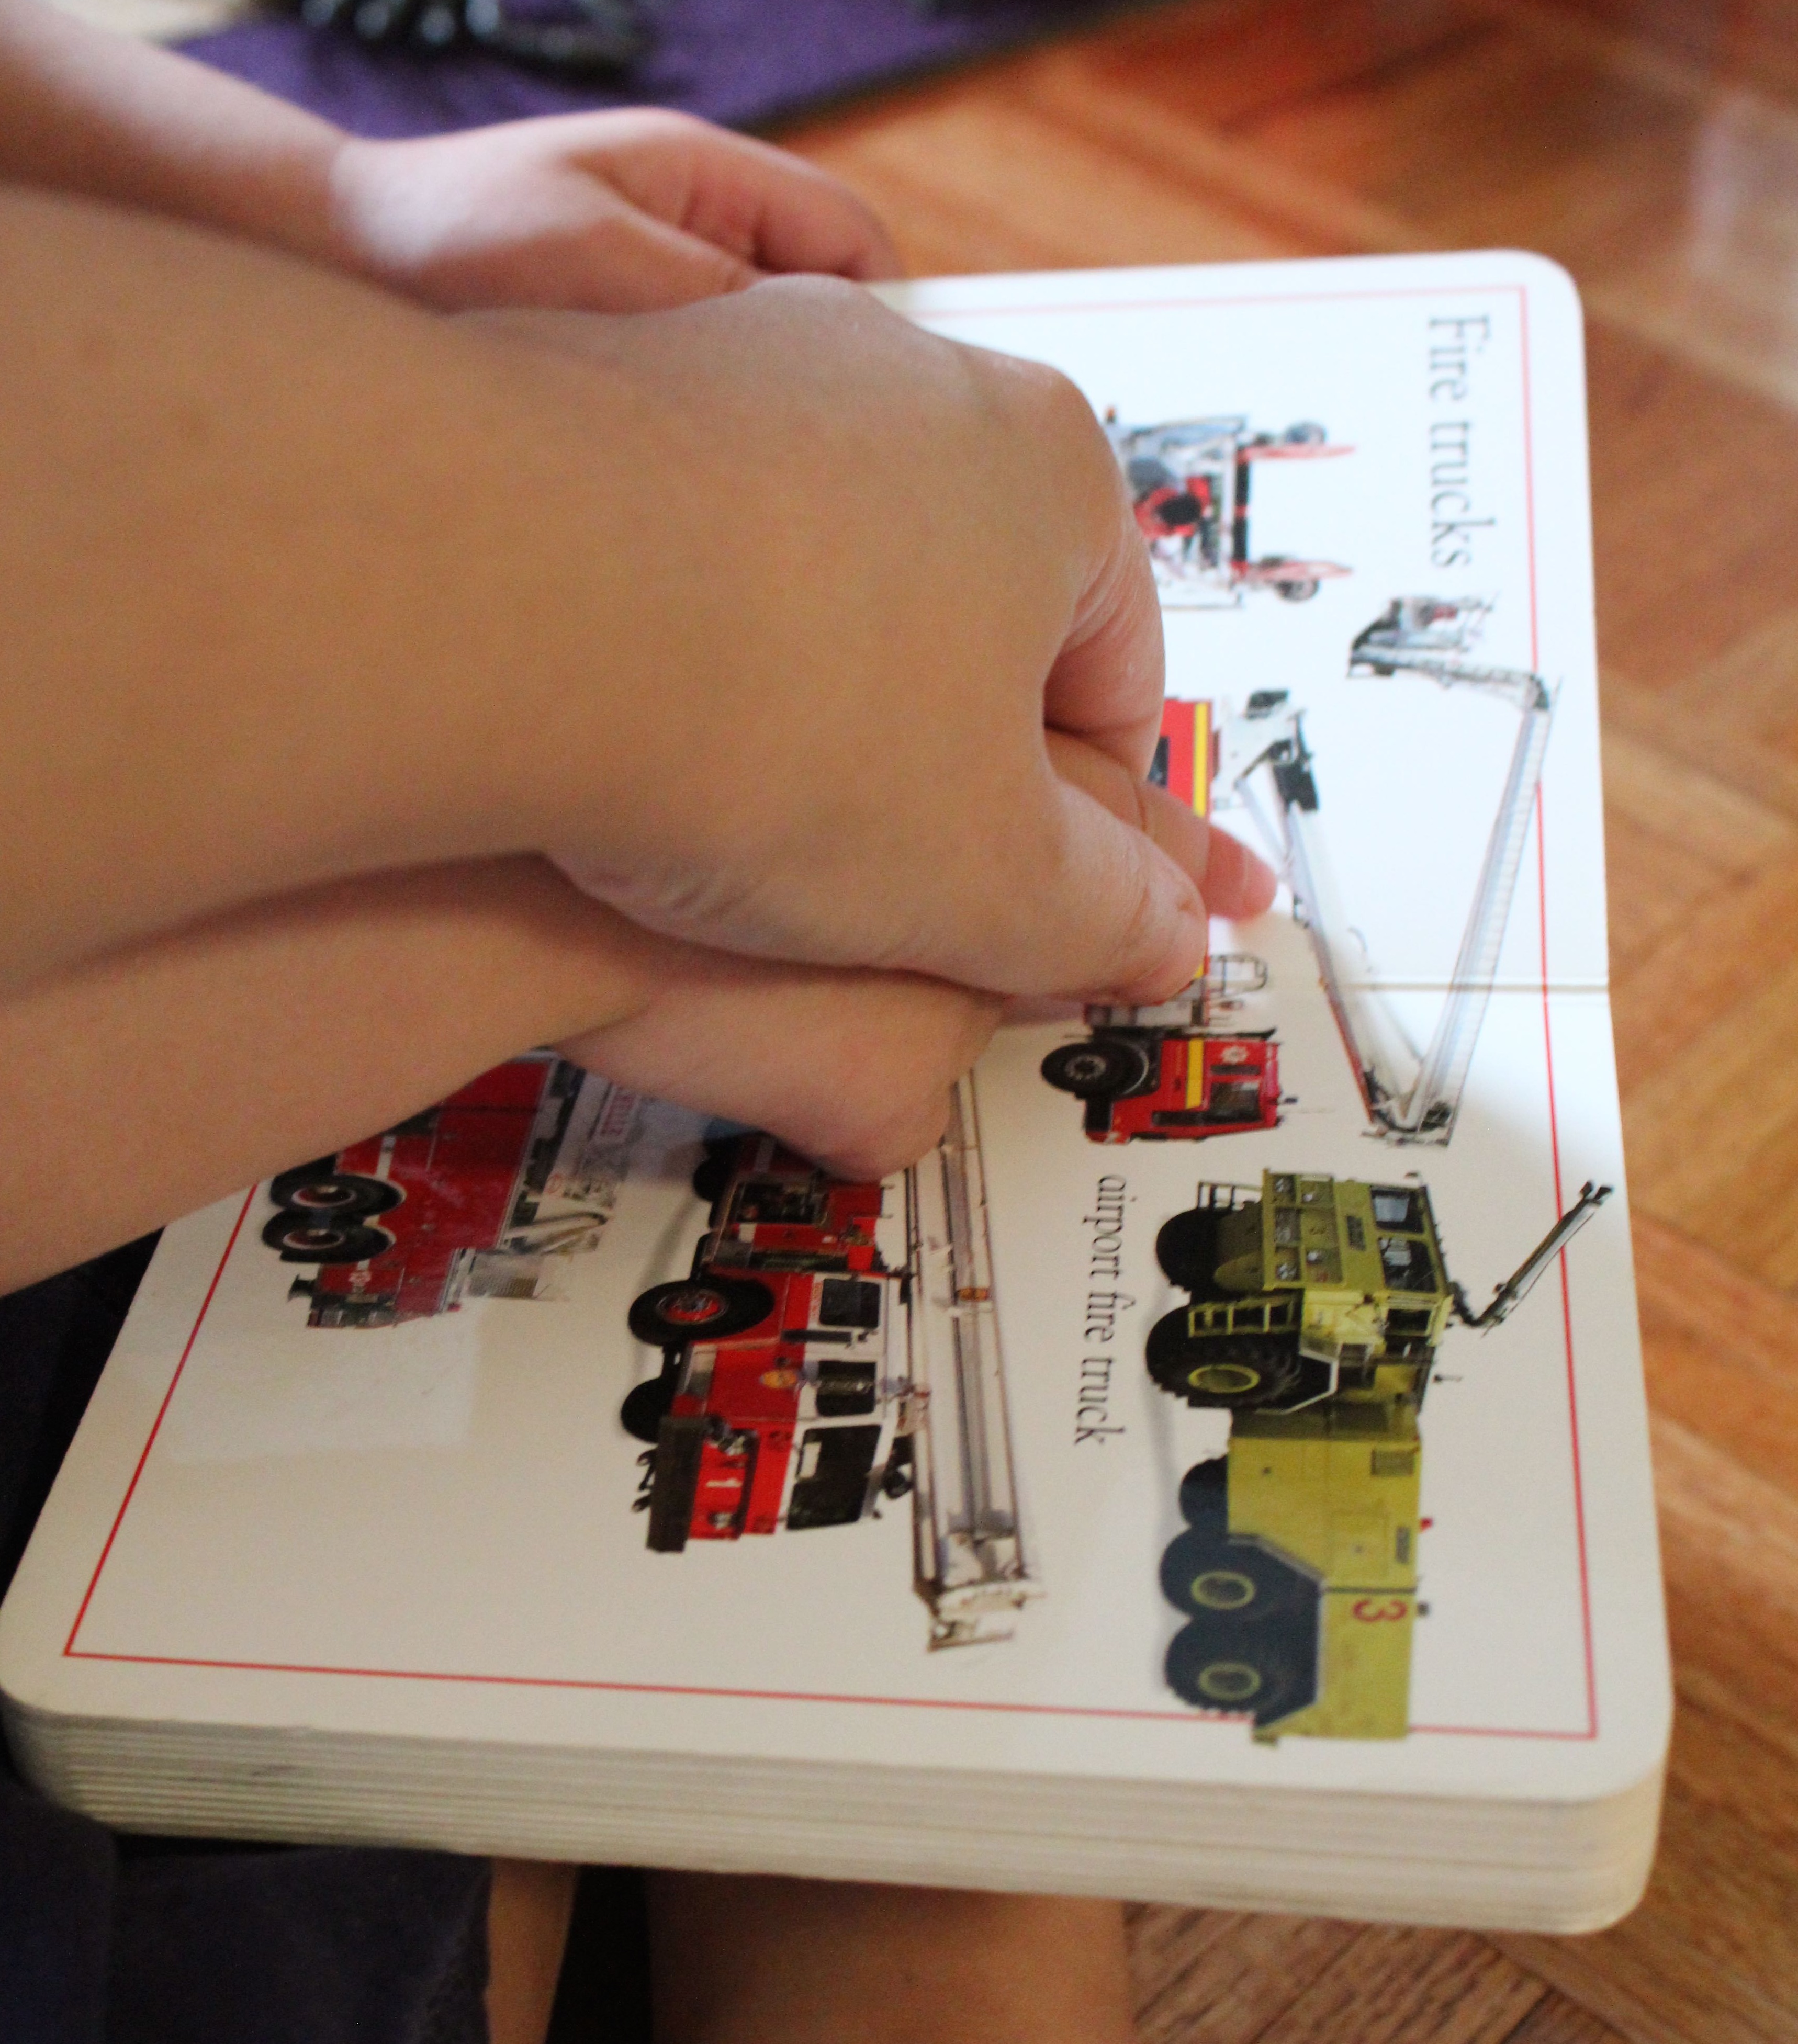 I use the hand-over-hand prompting method to help Luke learn to point to show the fire trucks.